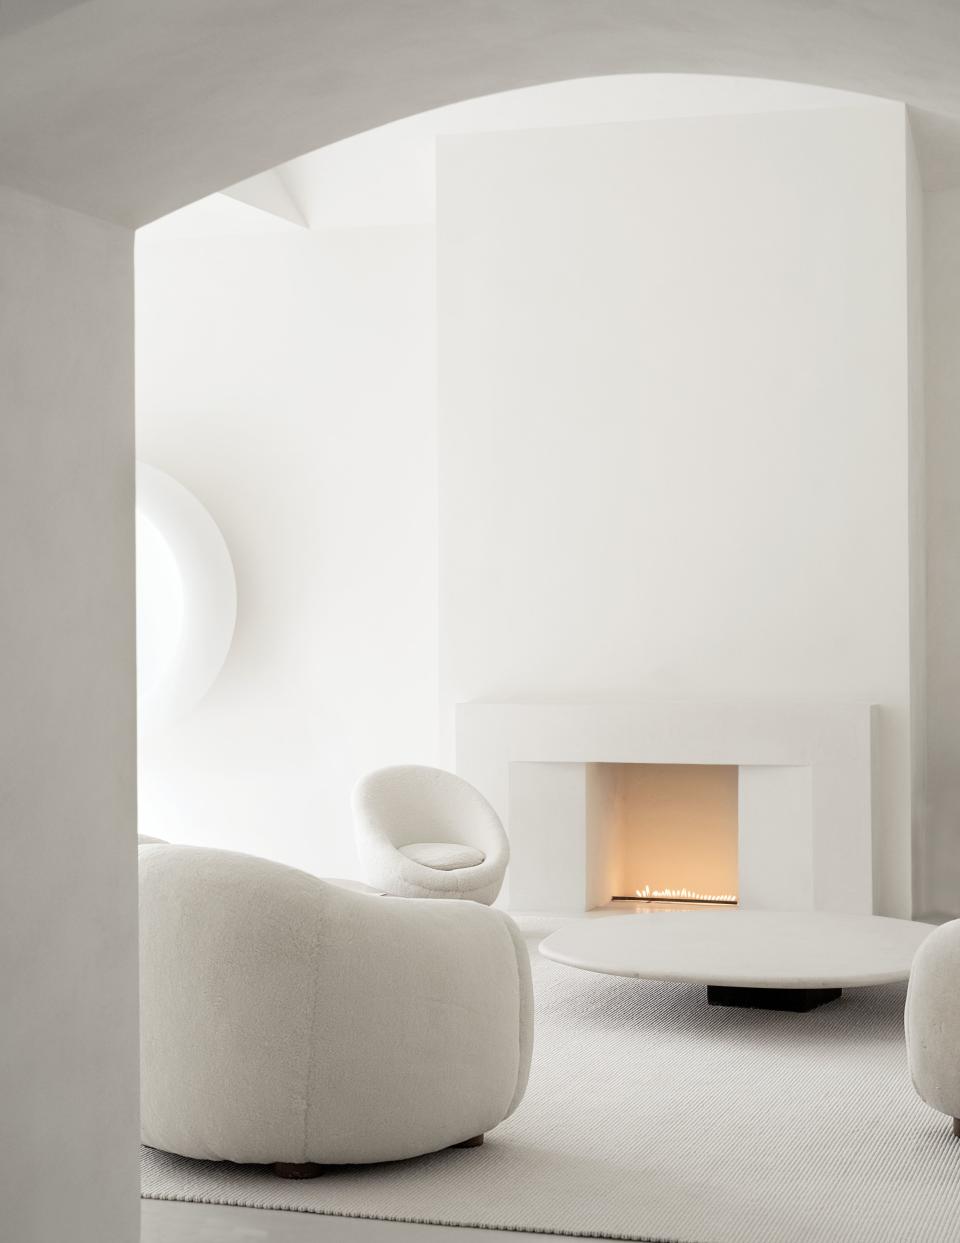 In the living room, Royère upholstered seating surrounds a limestone cocktail table by Axel Vervoordt.